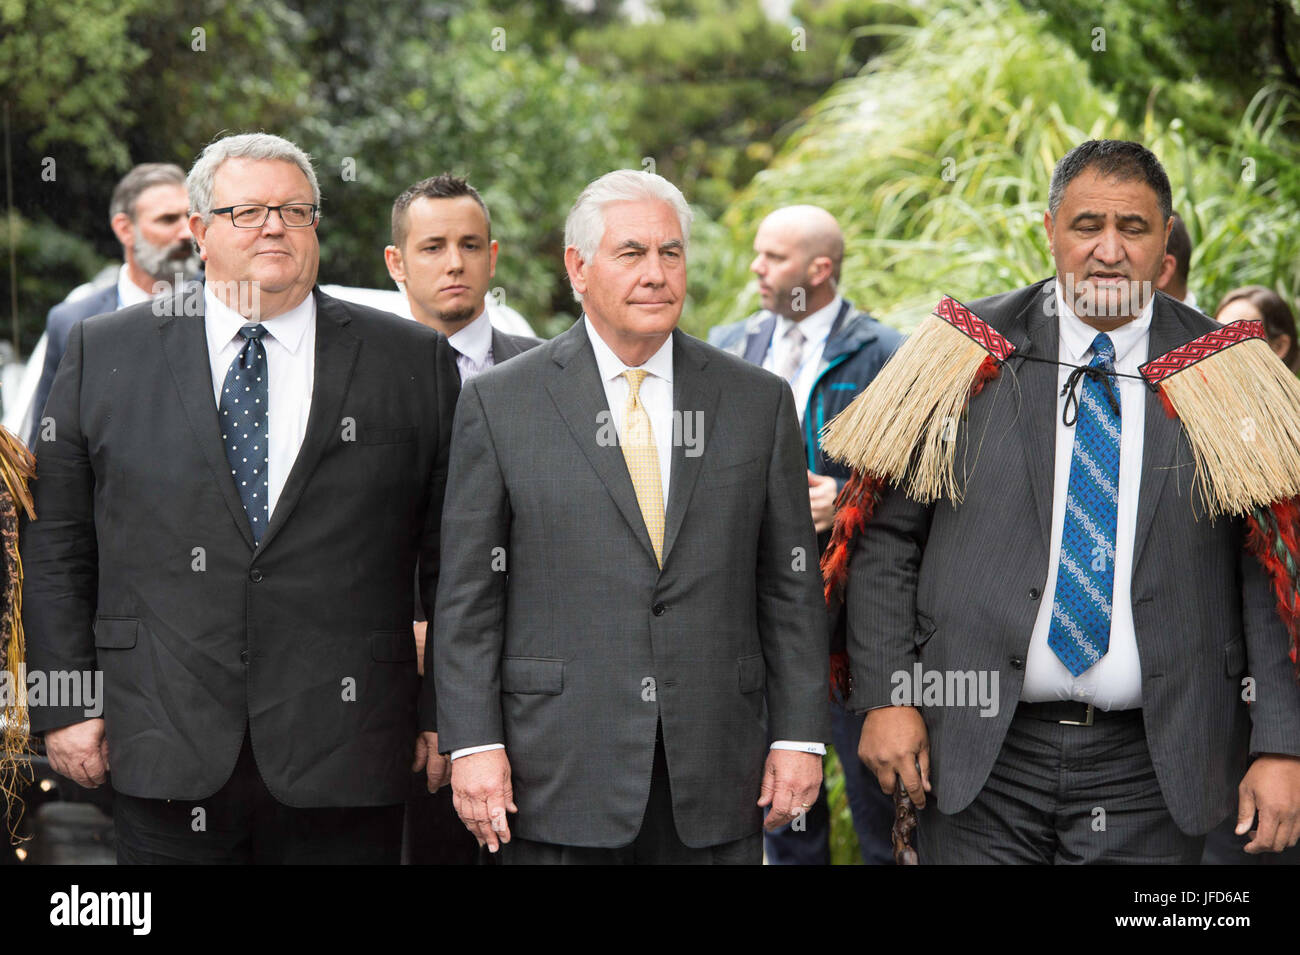 U.S. Secretary of State Rex Tillerson, with New Zealander Foreign Minister Gerry Brownlee, is welcomed to New Zealand with a pōwhiri ceremony at Premier House in Wellington, New Zealand, on June 6, 2017. Stock Photo